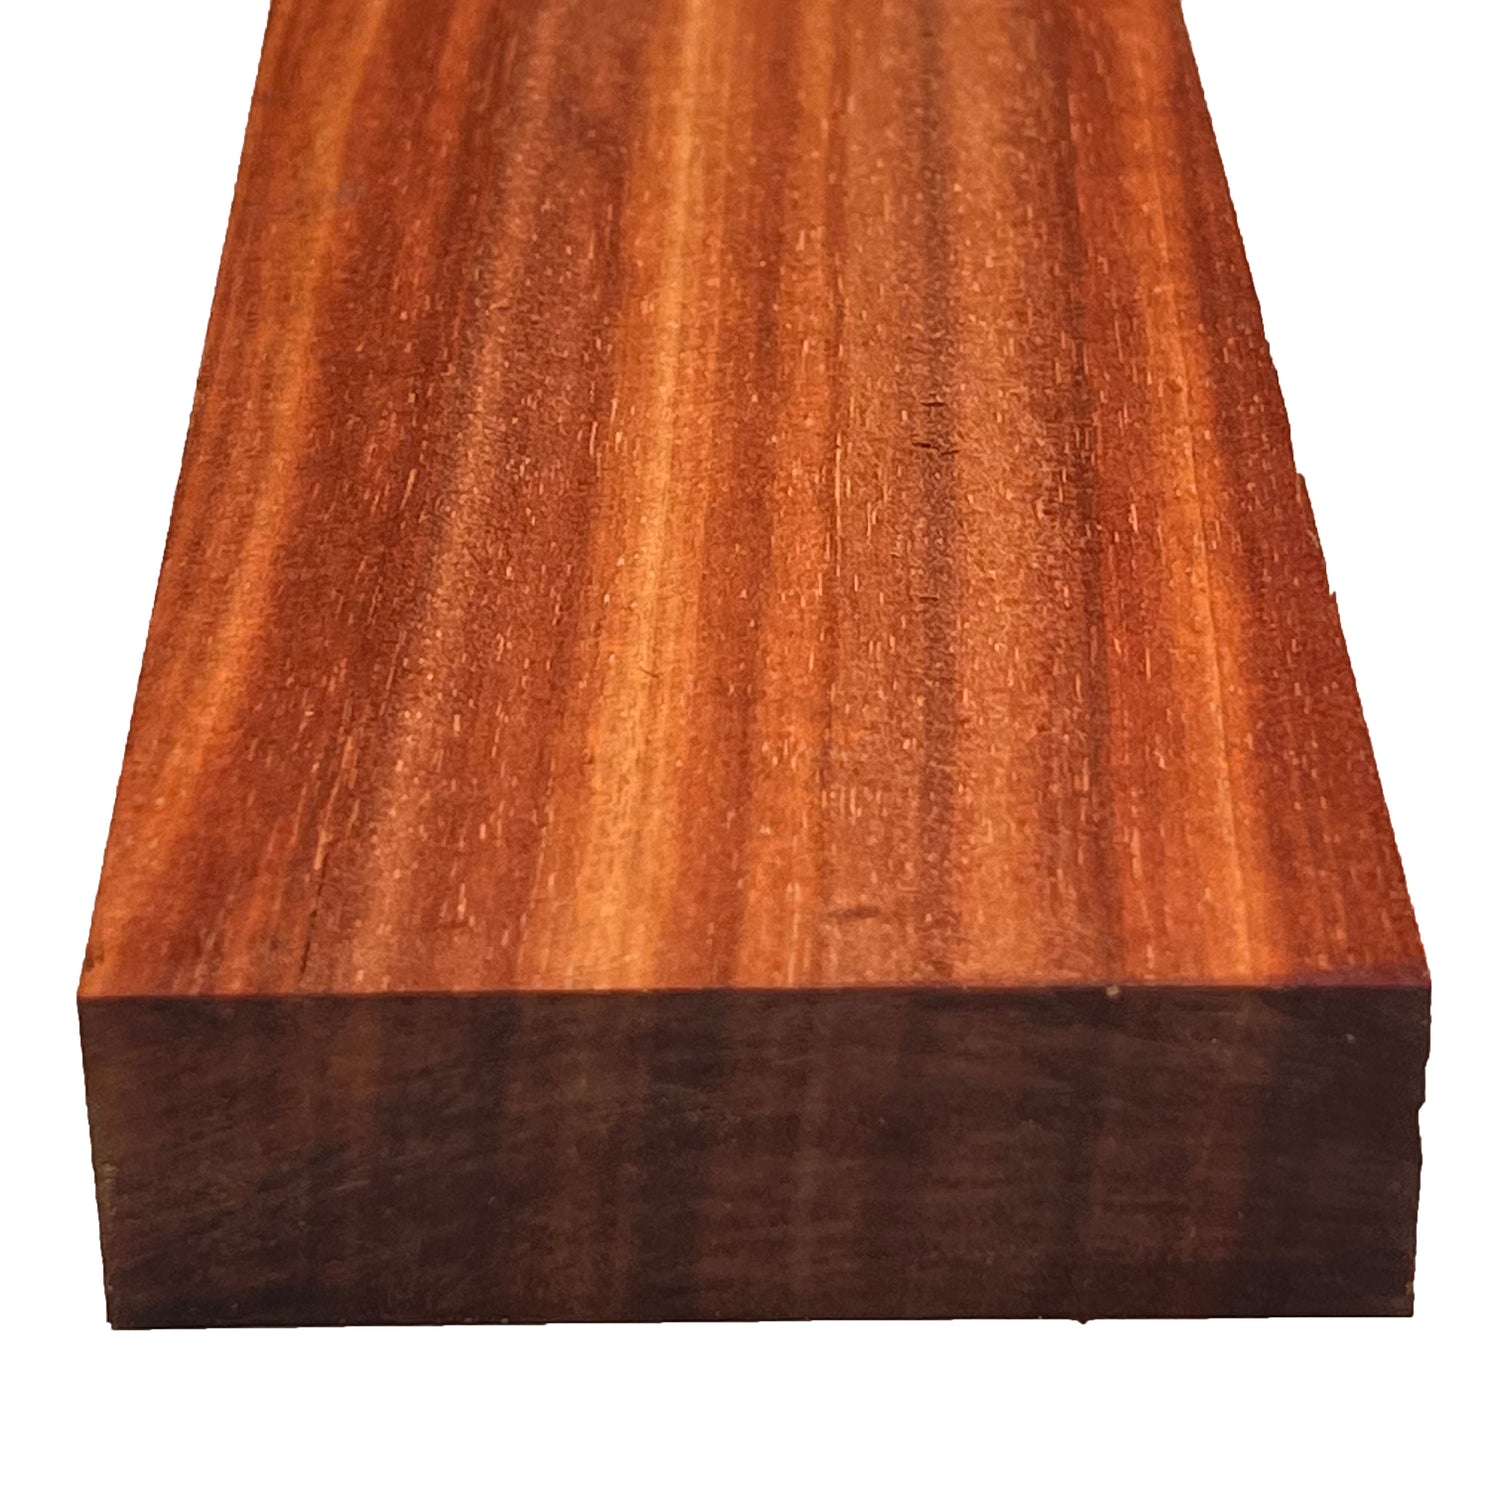 Bloodwood Guitar Neck Blanks - Exotic Wood Zone - Buy online Across USA 